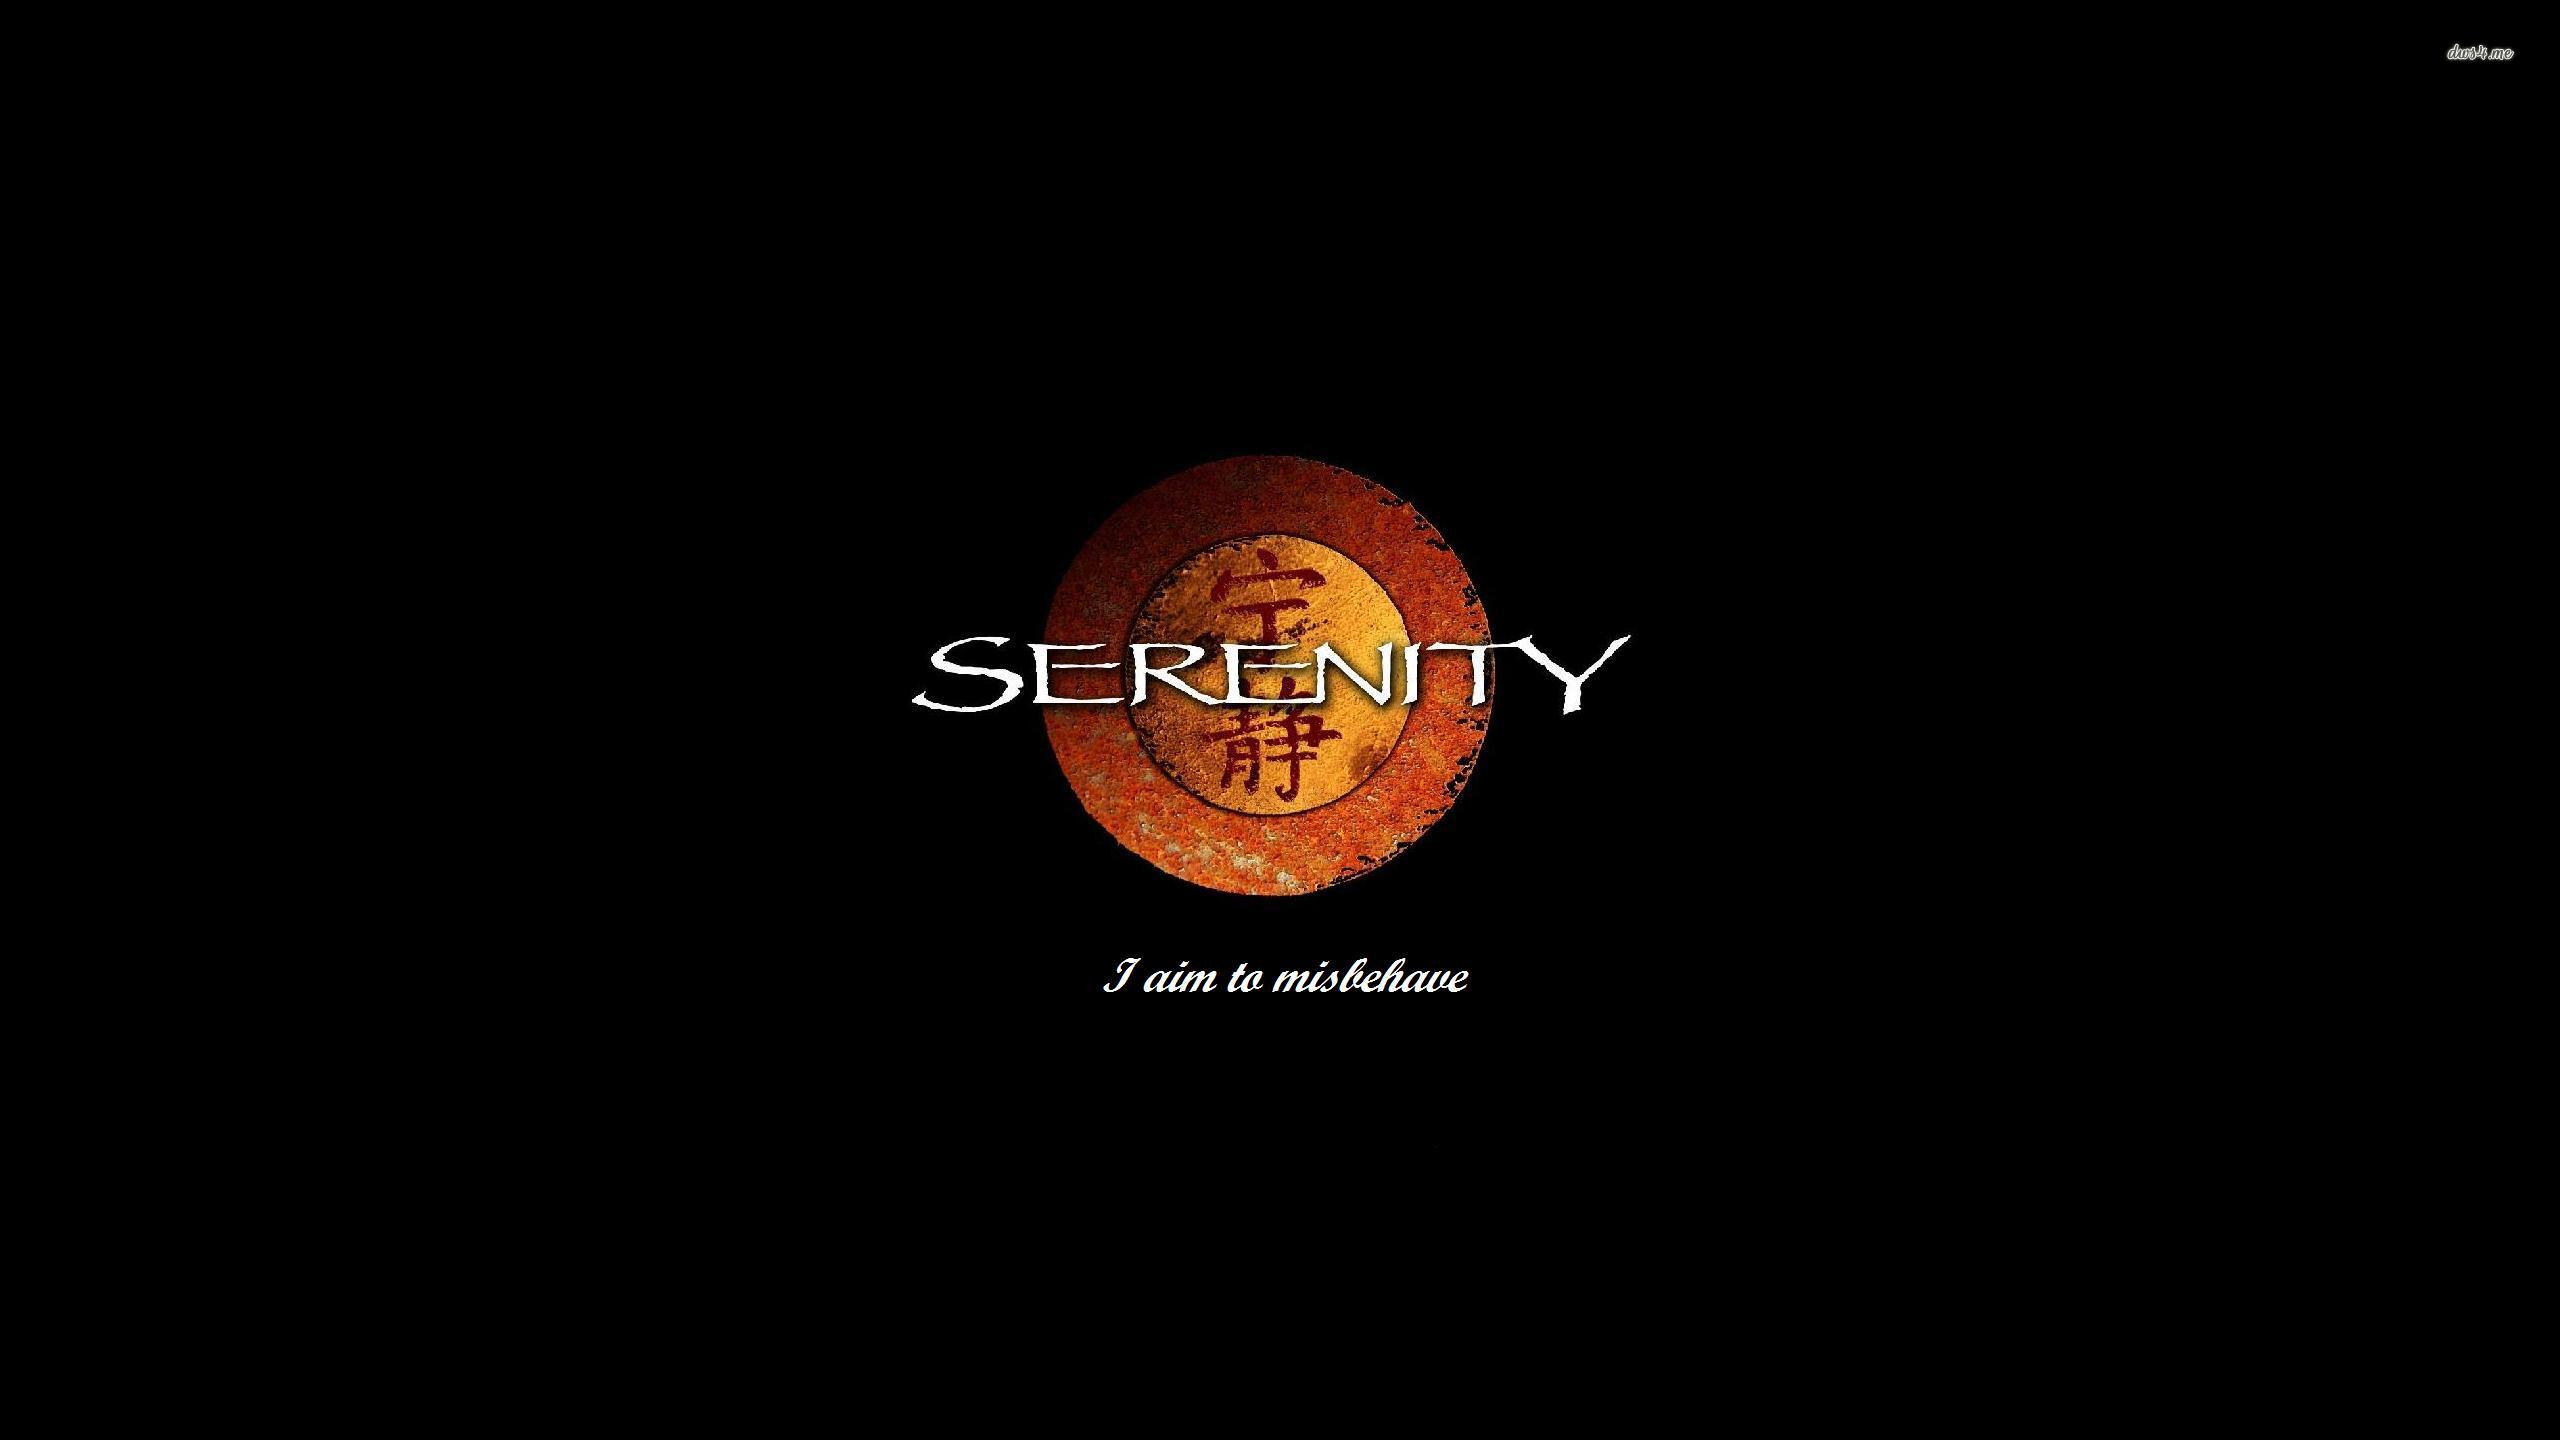 I aim to misbehave - Serenity wallpaper - TV Show wallpapers - #45348